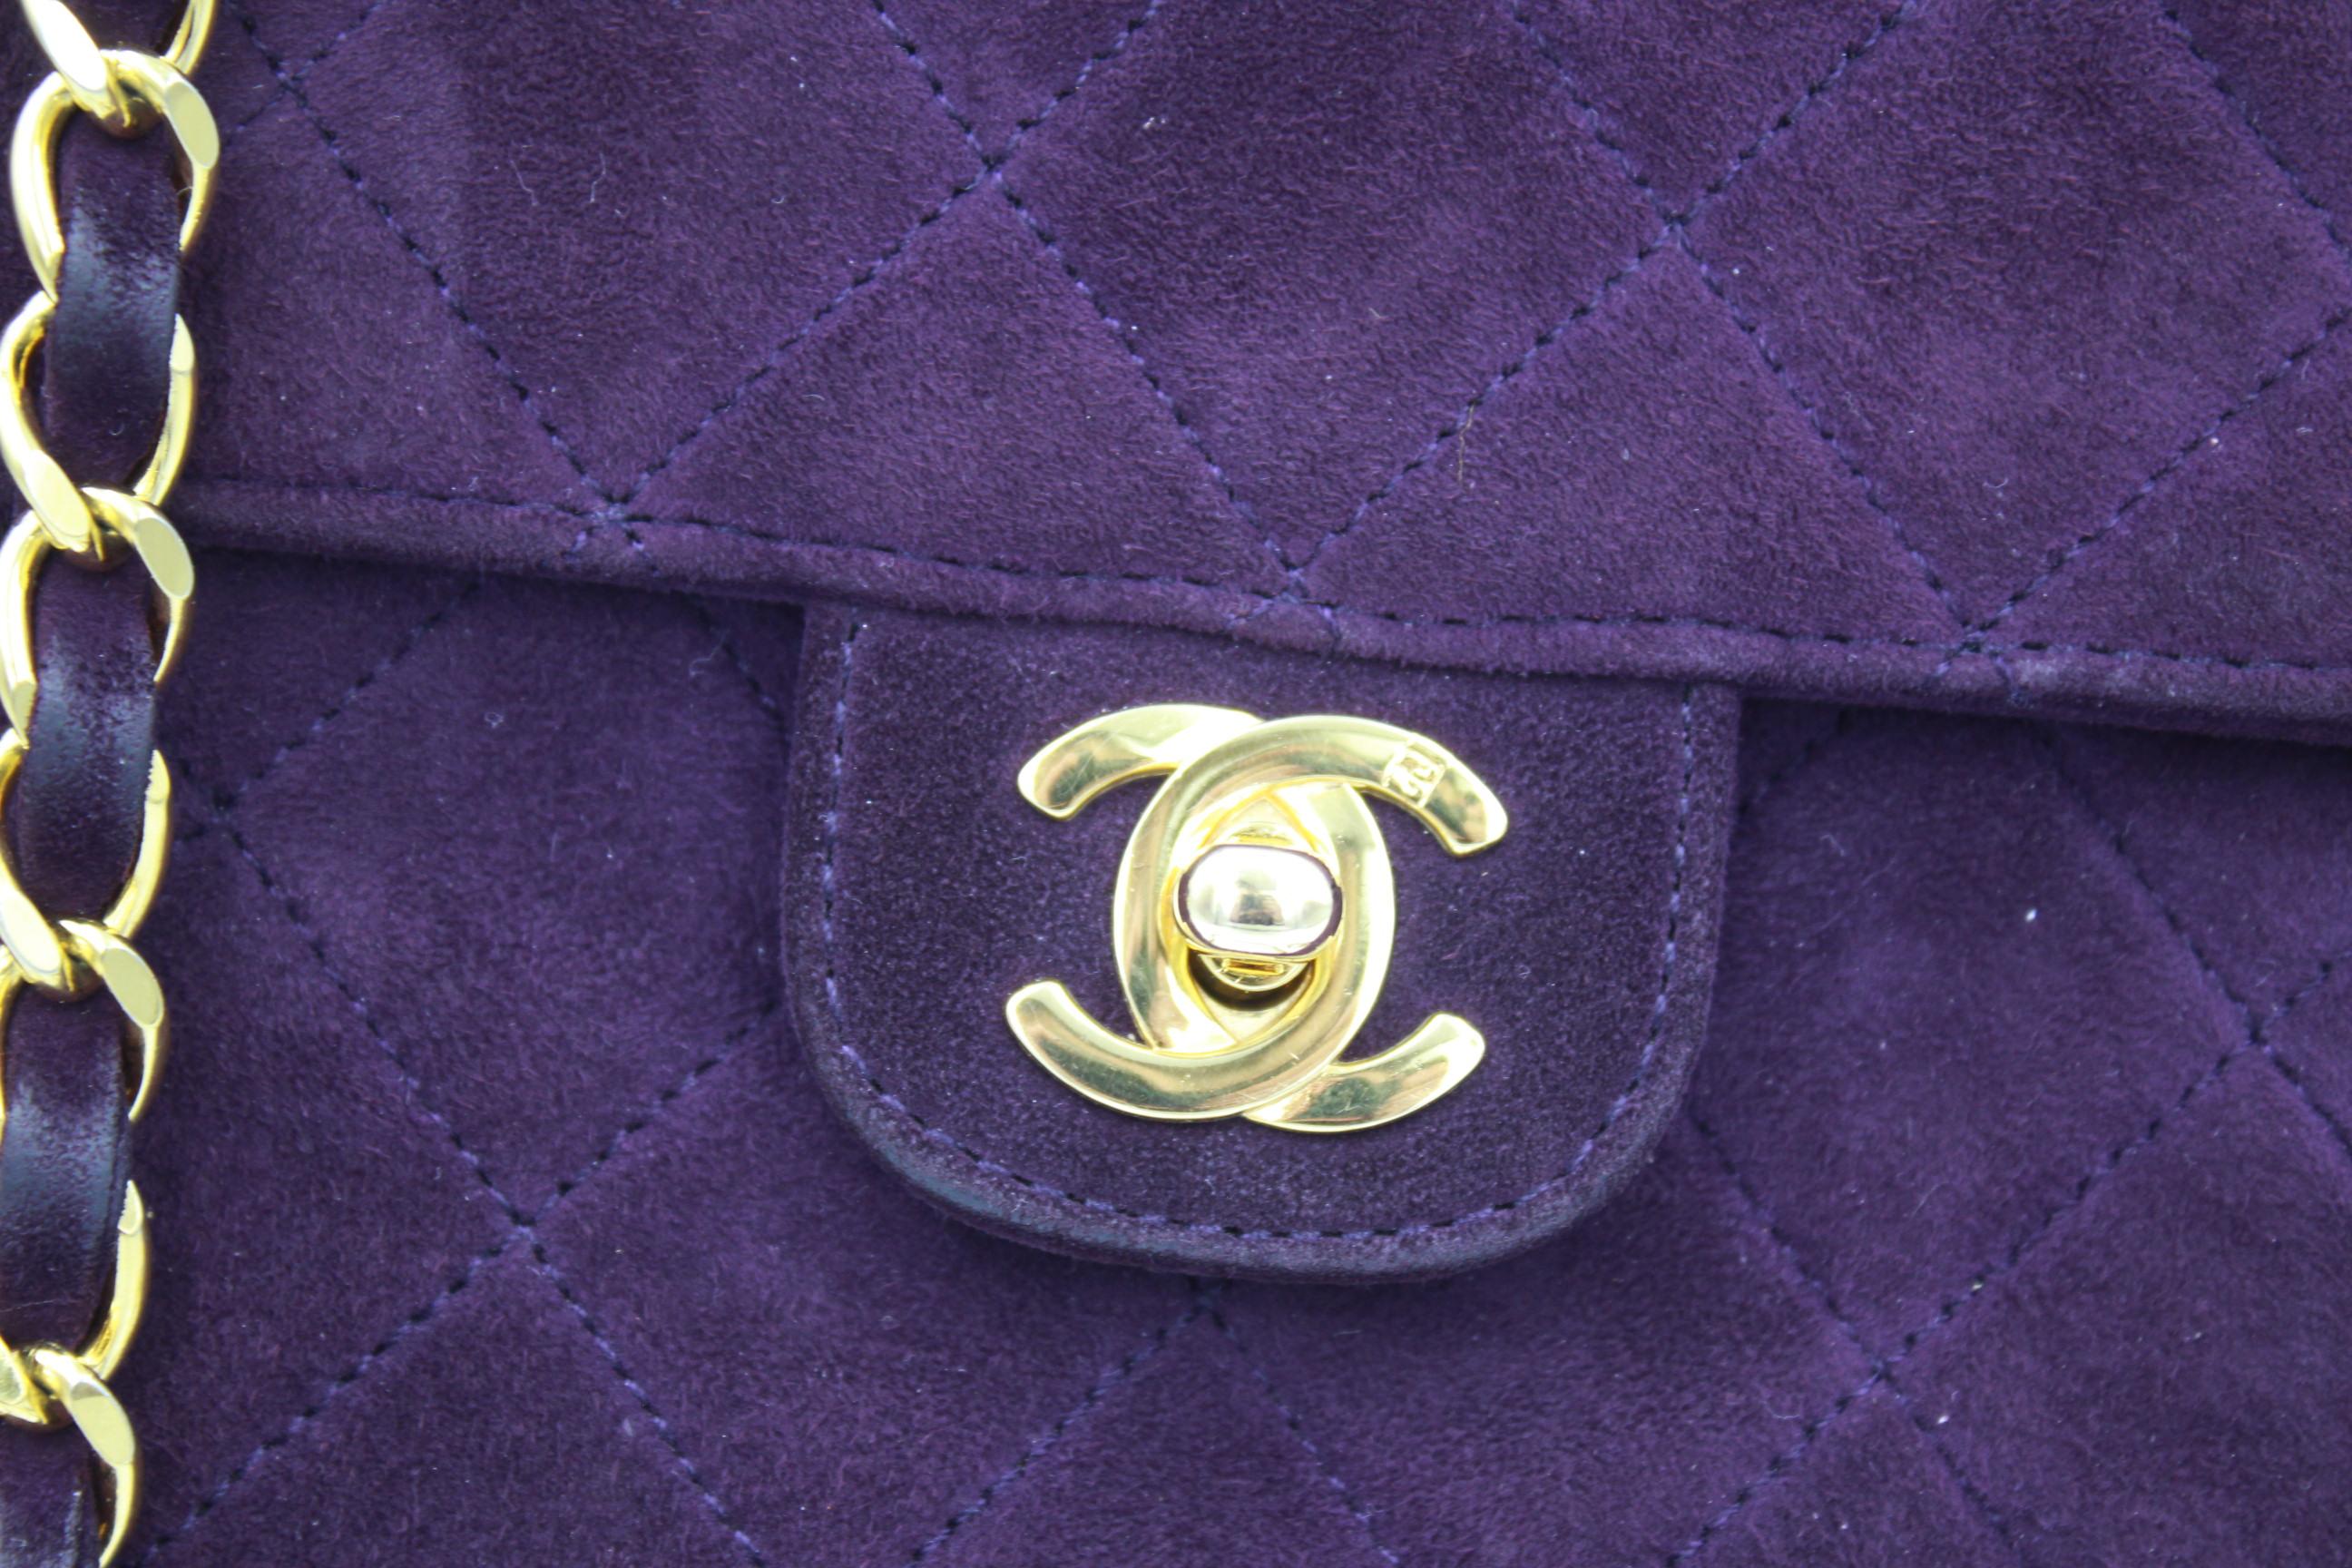 Chanel 2.55 Small Suede Purple Crossbody bag
Good condition, light signs of wear in the corners.
Hologram inside
Size  24*15 cm
